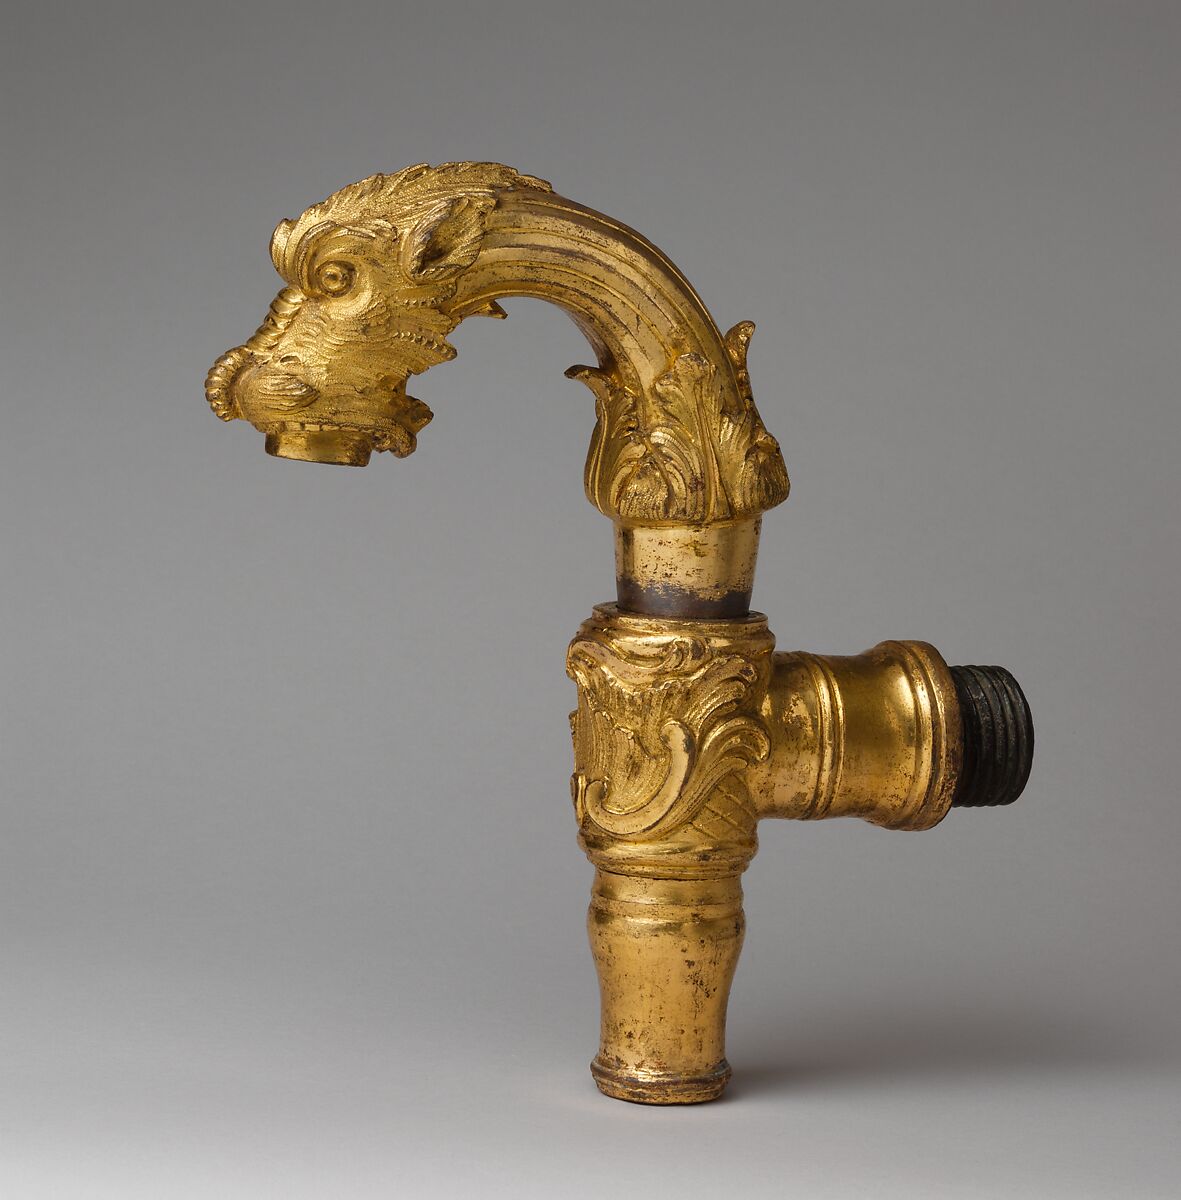 Faucet (one of a pair), Gilt bronze, French 